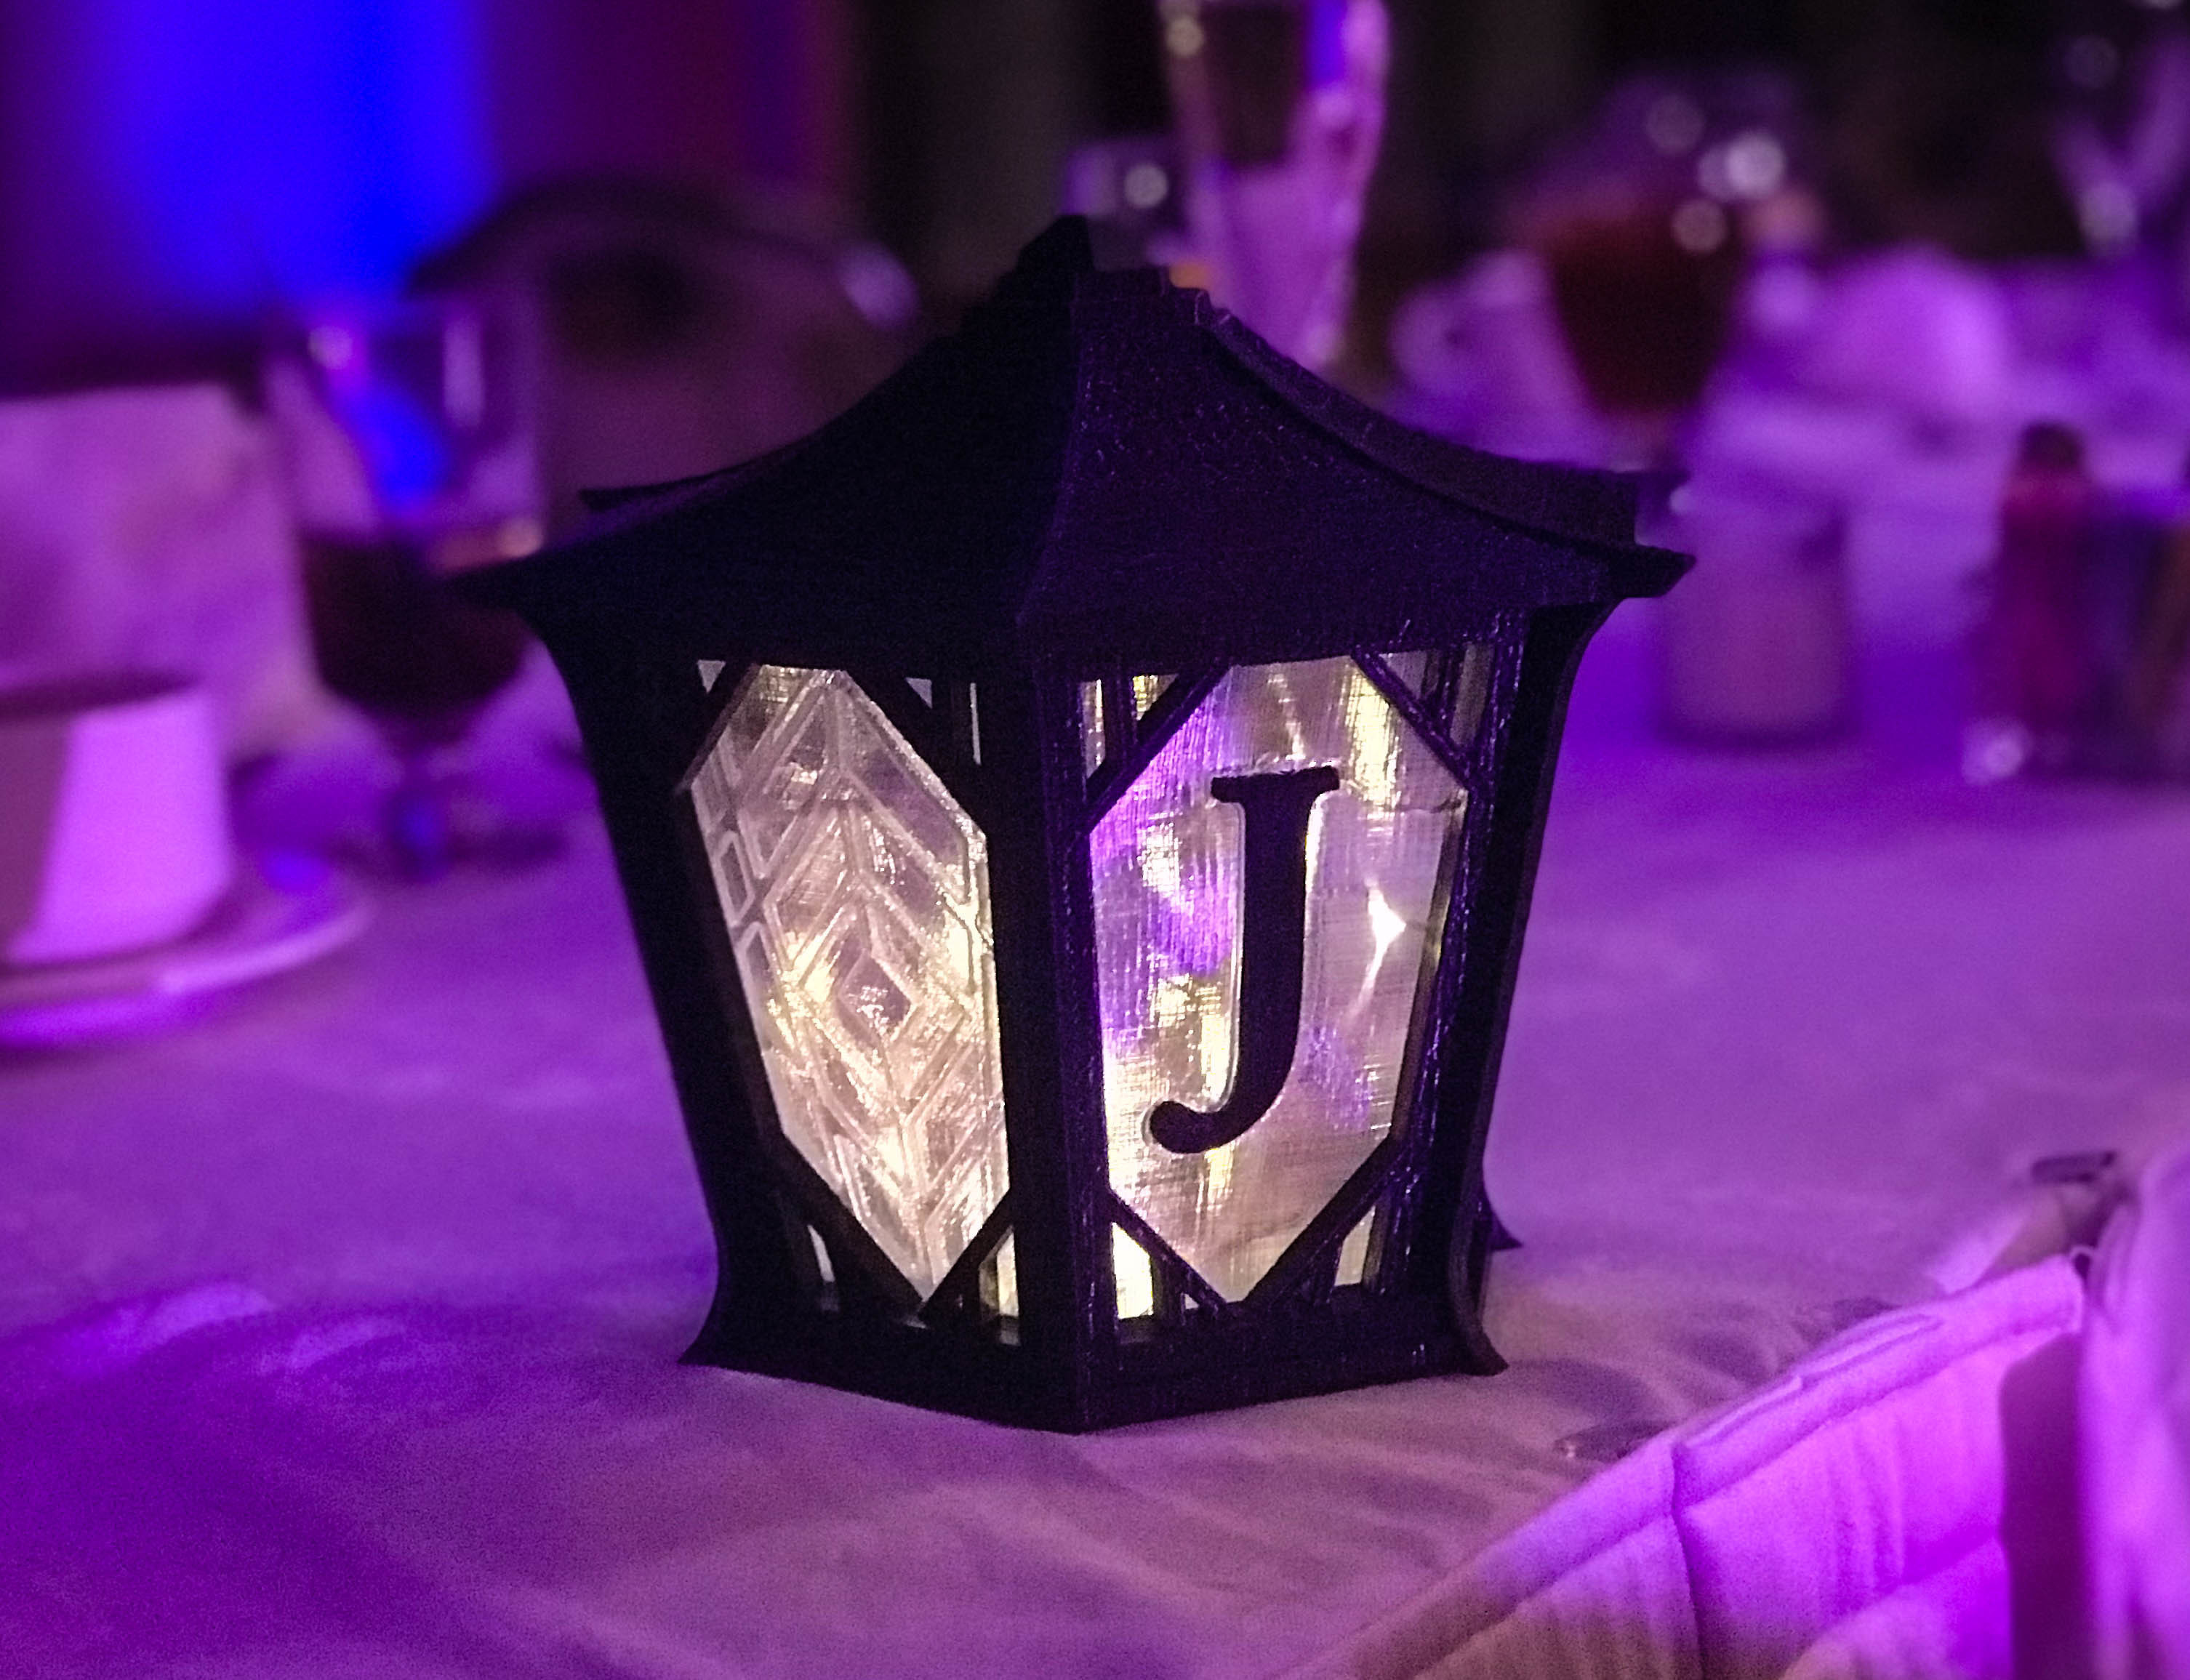 3D Printed Japanese Centerpiece Lanterns for Wedding by 